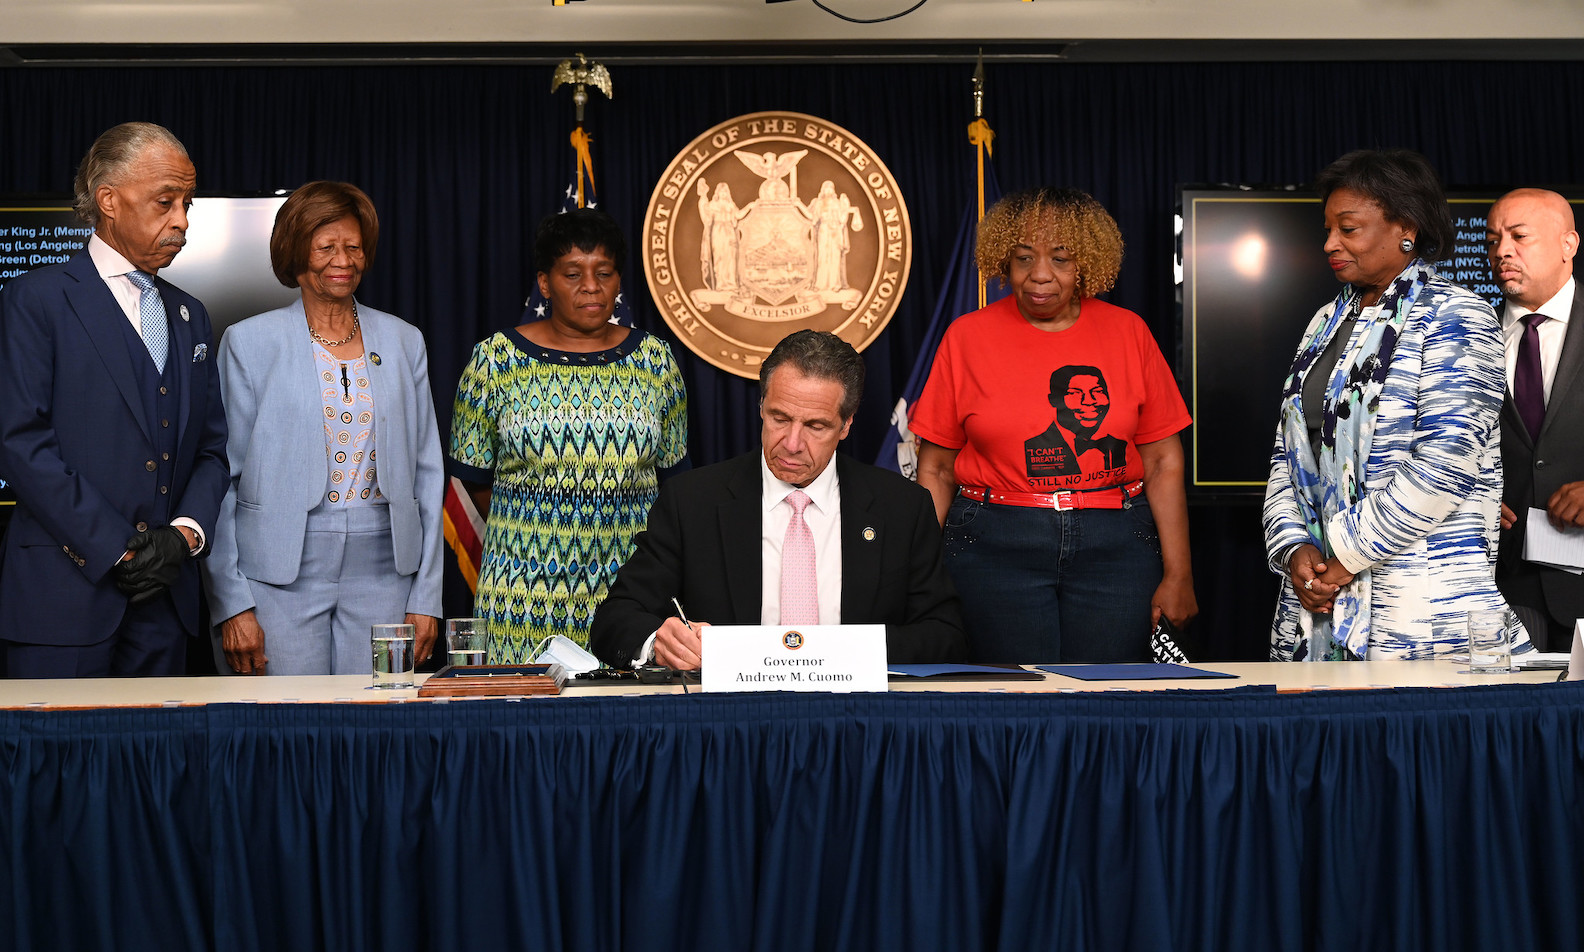 Gov. Andrew M. Cuomo on Friday signed an executive order - the `New York State Police Reform and Reinvention Collaborative` - requiring local police agencies, including the NYPD, to develop a plan that reinvents and modernizes police strategies and programs in their community based on community input. Each police agency's reform plan must address policies, procedures, practices and deployment, including, but not limited to use of force. Joining Cuomo for the bill signing were: the Rev. Al Sharpton, Senate Majority Leader Andrea Stewart-Cousins, Assembly Leader Carl Heastie, Valerie Bell (mother of Sean Bell), Gwen Carr (mother of Eric Garner) and NAACP New York State Conference President Hazel N. Dukes. (Photo by Kevin P. Coughlin/Office of Gov. Andrew M. Cuomo)